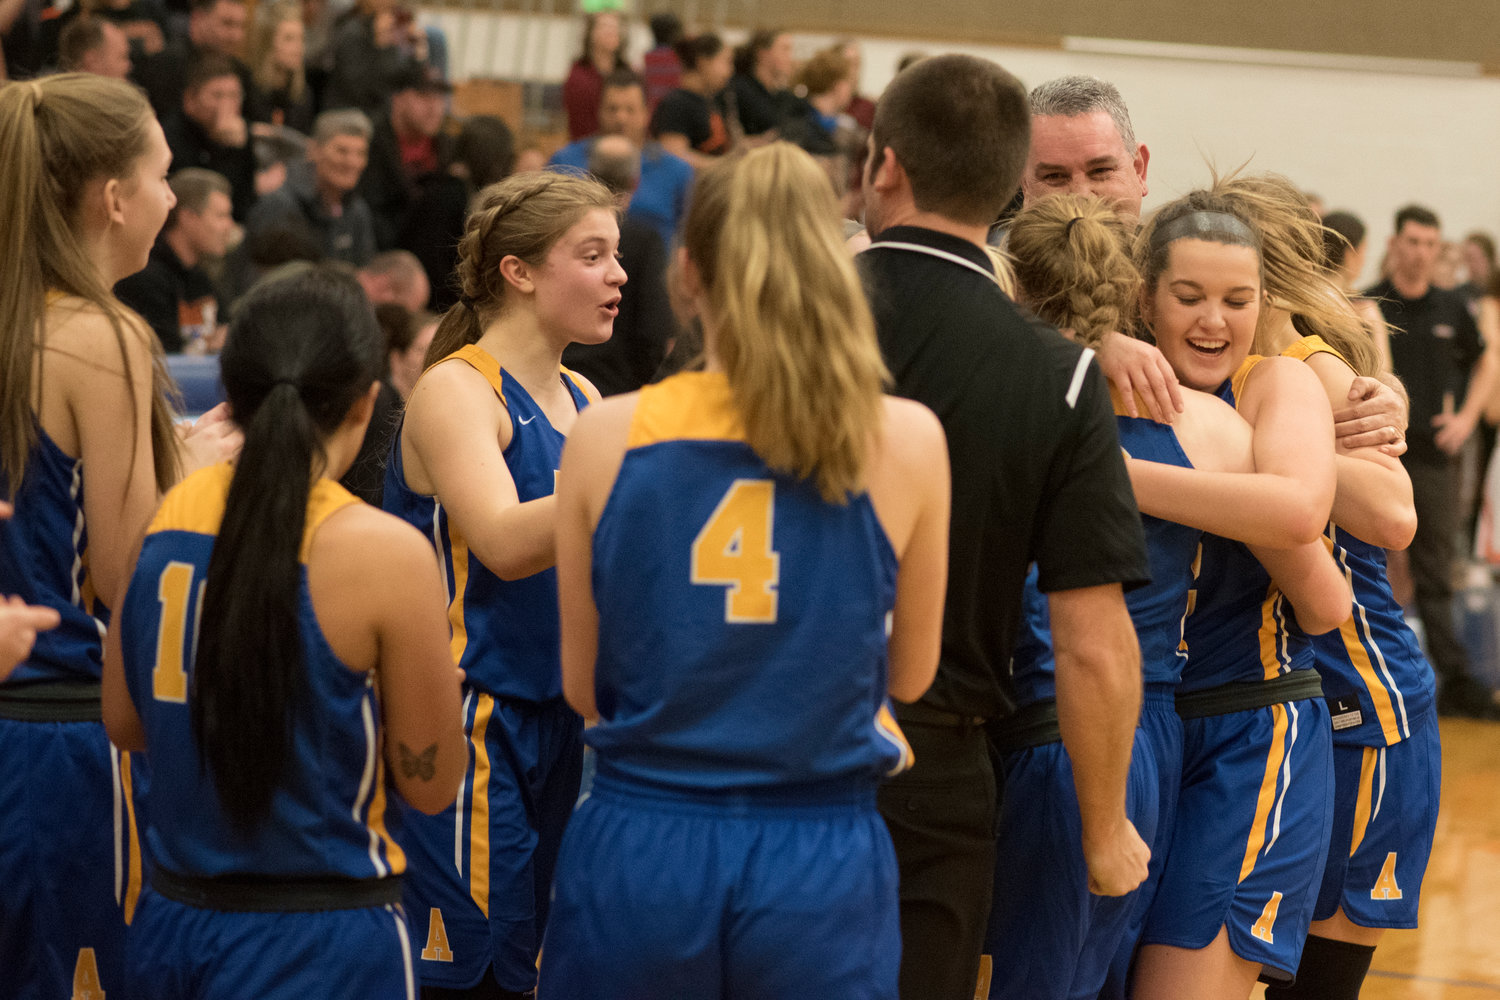 Adna players react after the final buzzer sounds on the Pirates 46-33 win over Rainier Thursday. (Eric Trent / etrent@chronline.com)